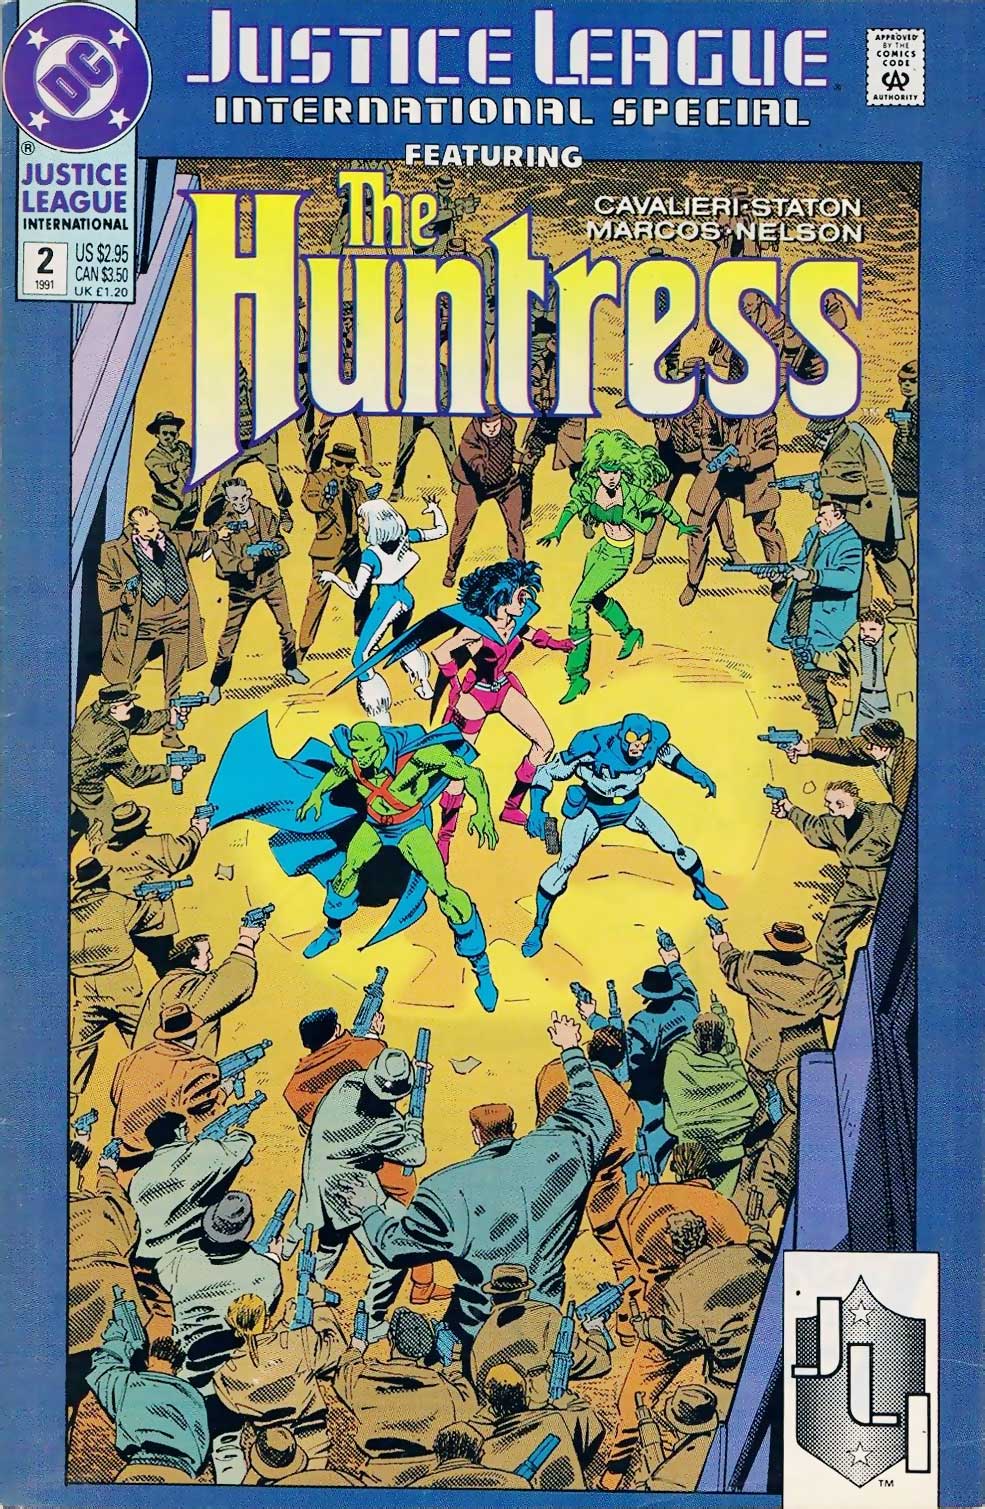 Justice League International Special #2 featuring the Huntress cover by Joe Staton & Bob Smith